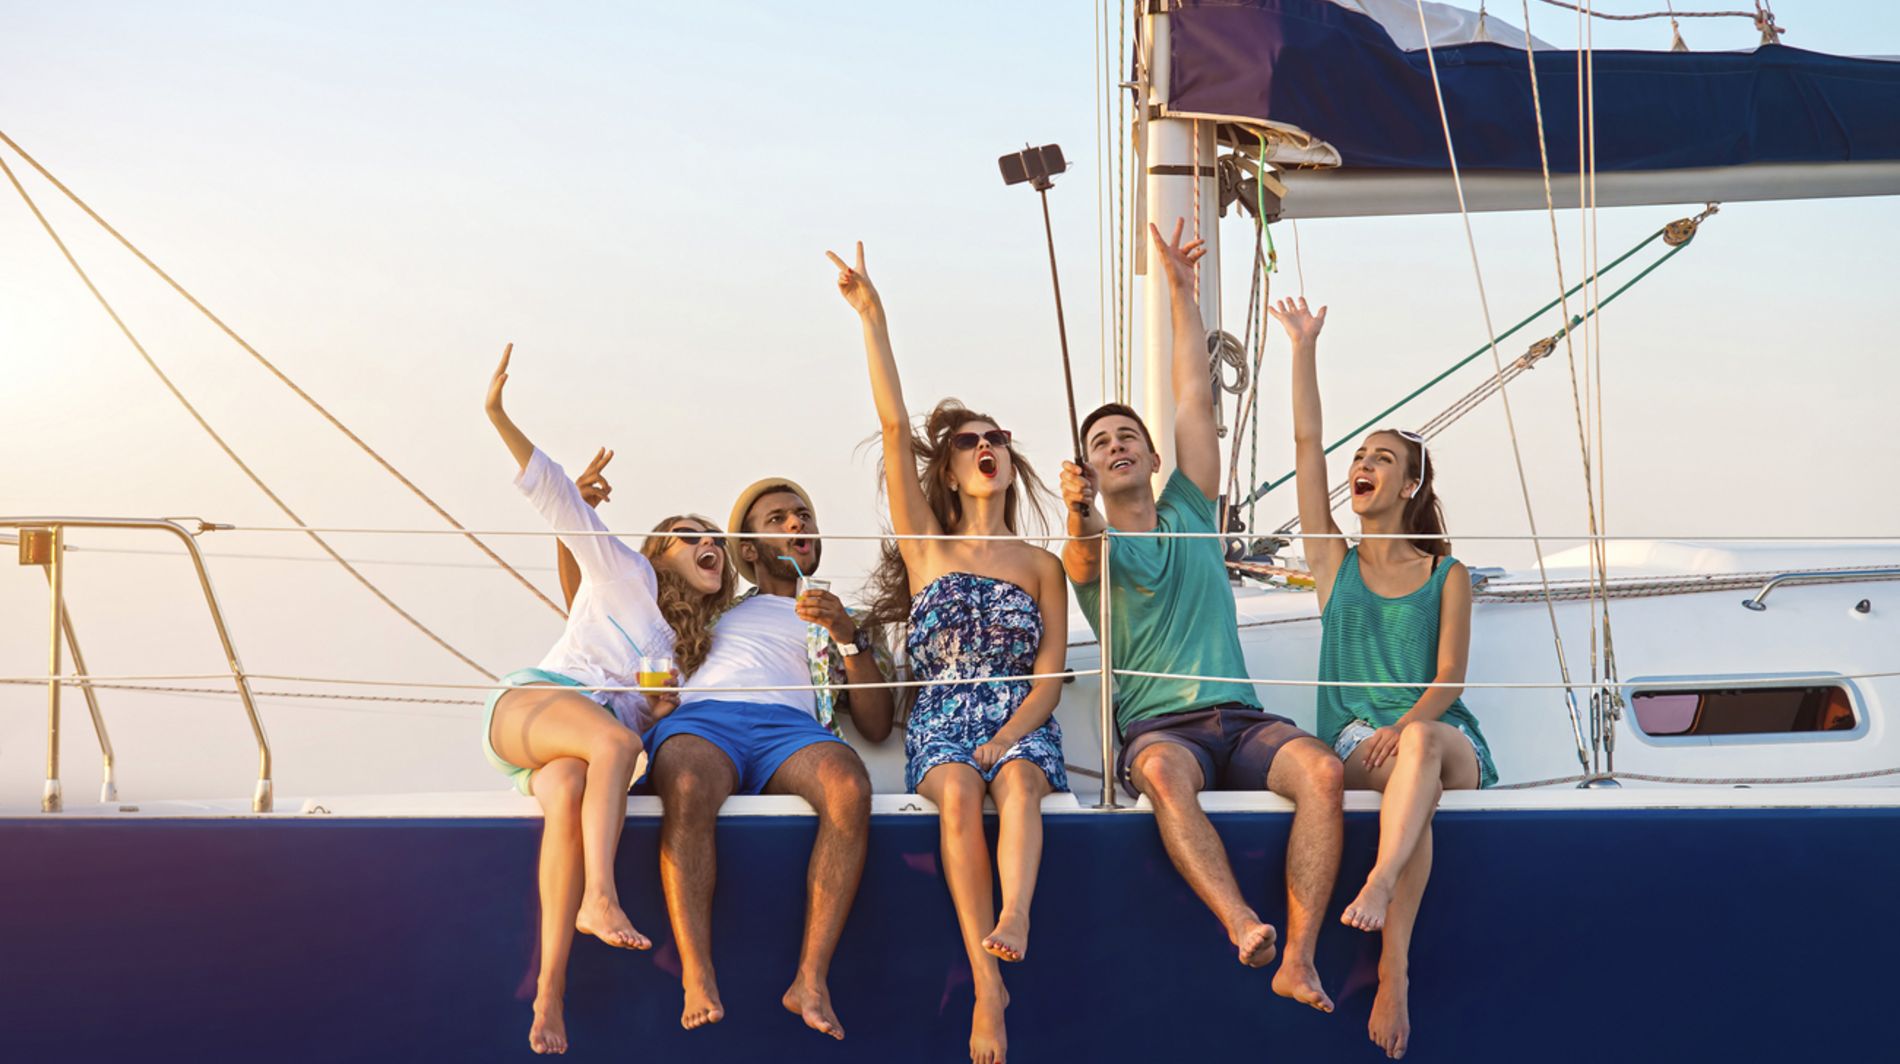 Top 5 reasons to charter a sailboat instead of staying in a hotel